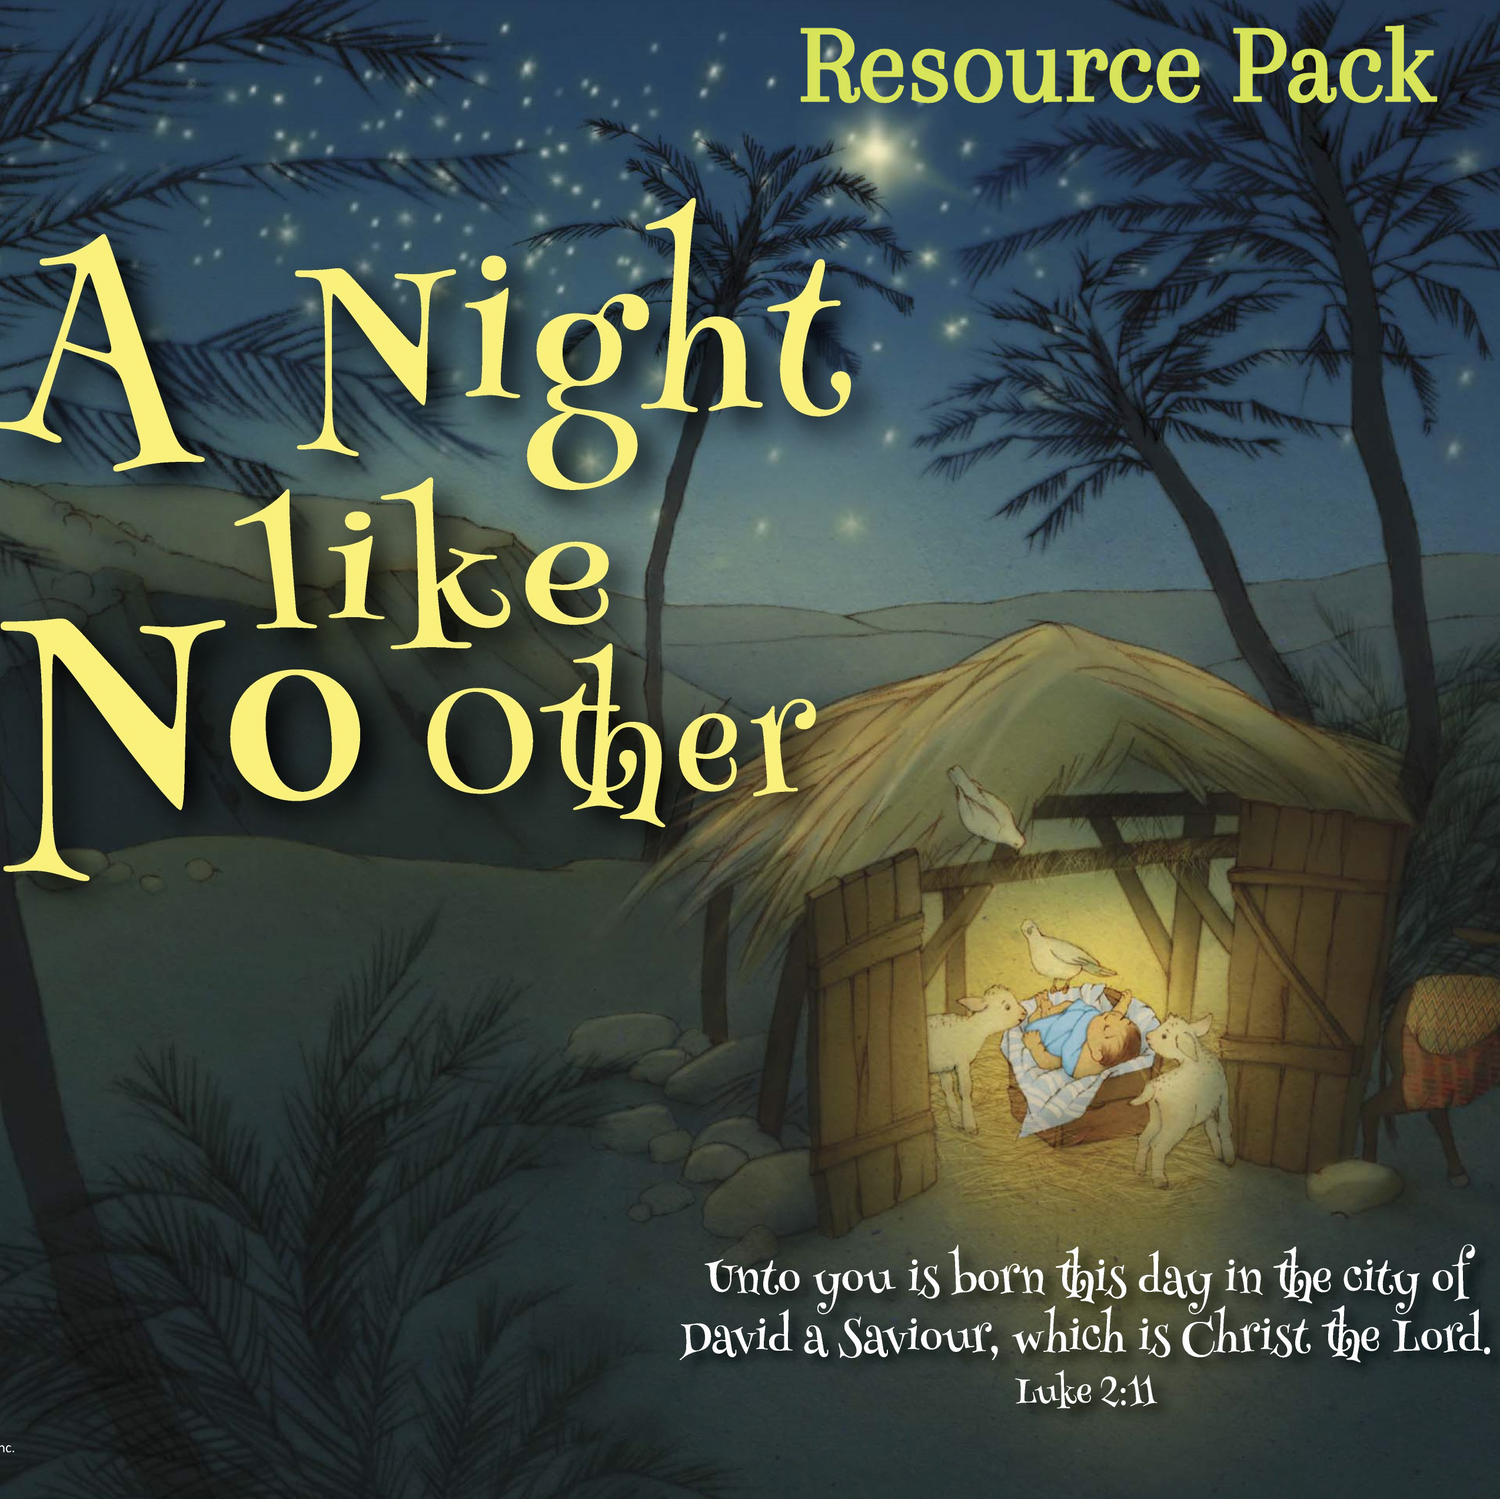 Resource Pack - A Night like No Other